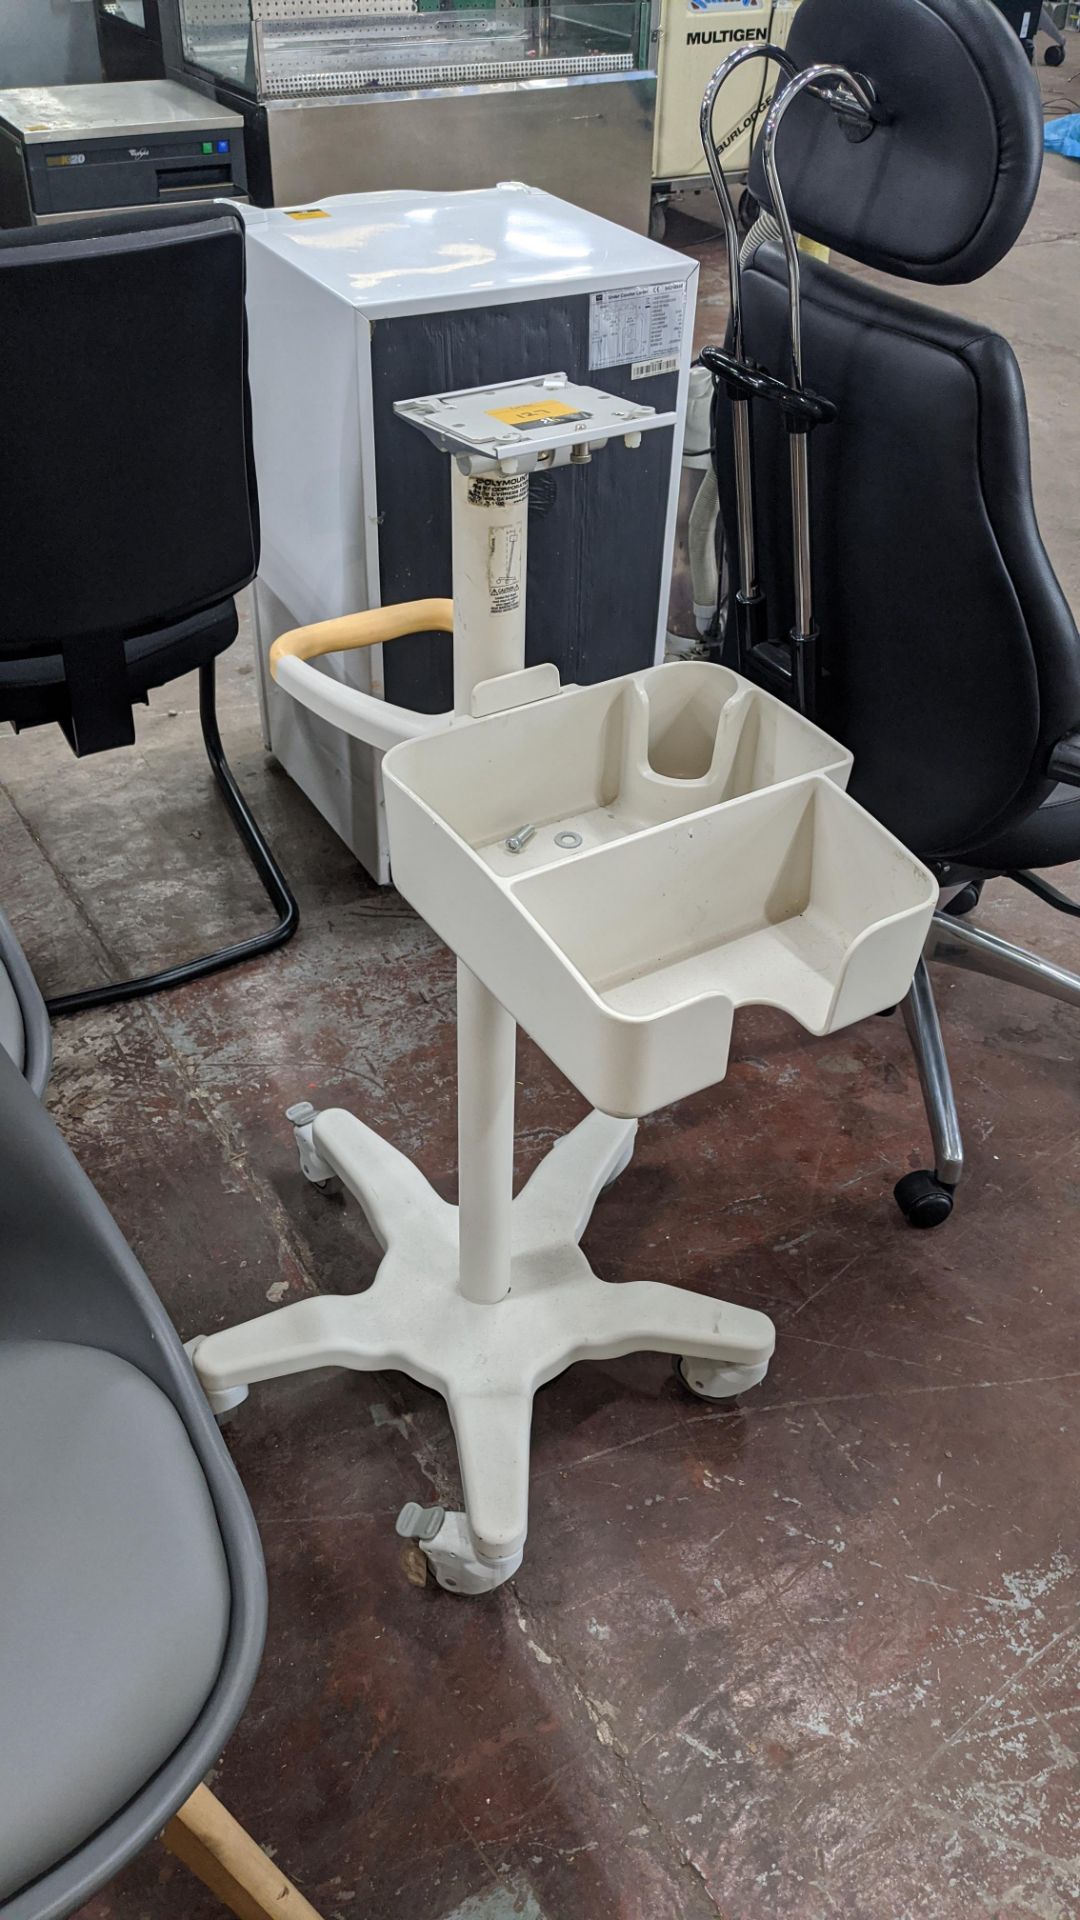 Medical monitor mobile stand. This is one of a small number of lots that comprise the residual